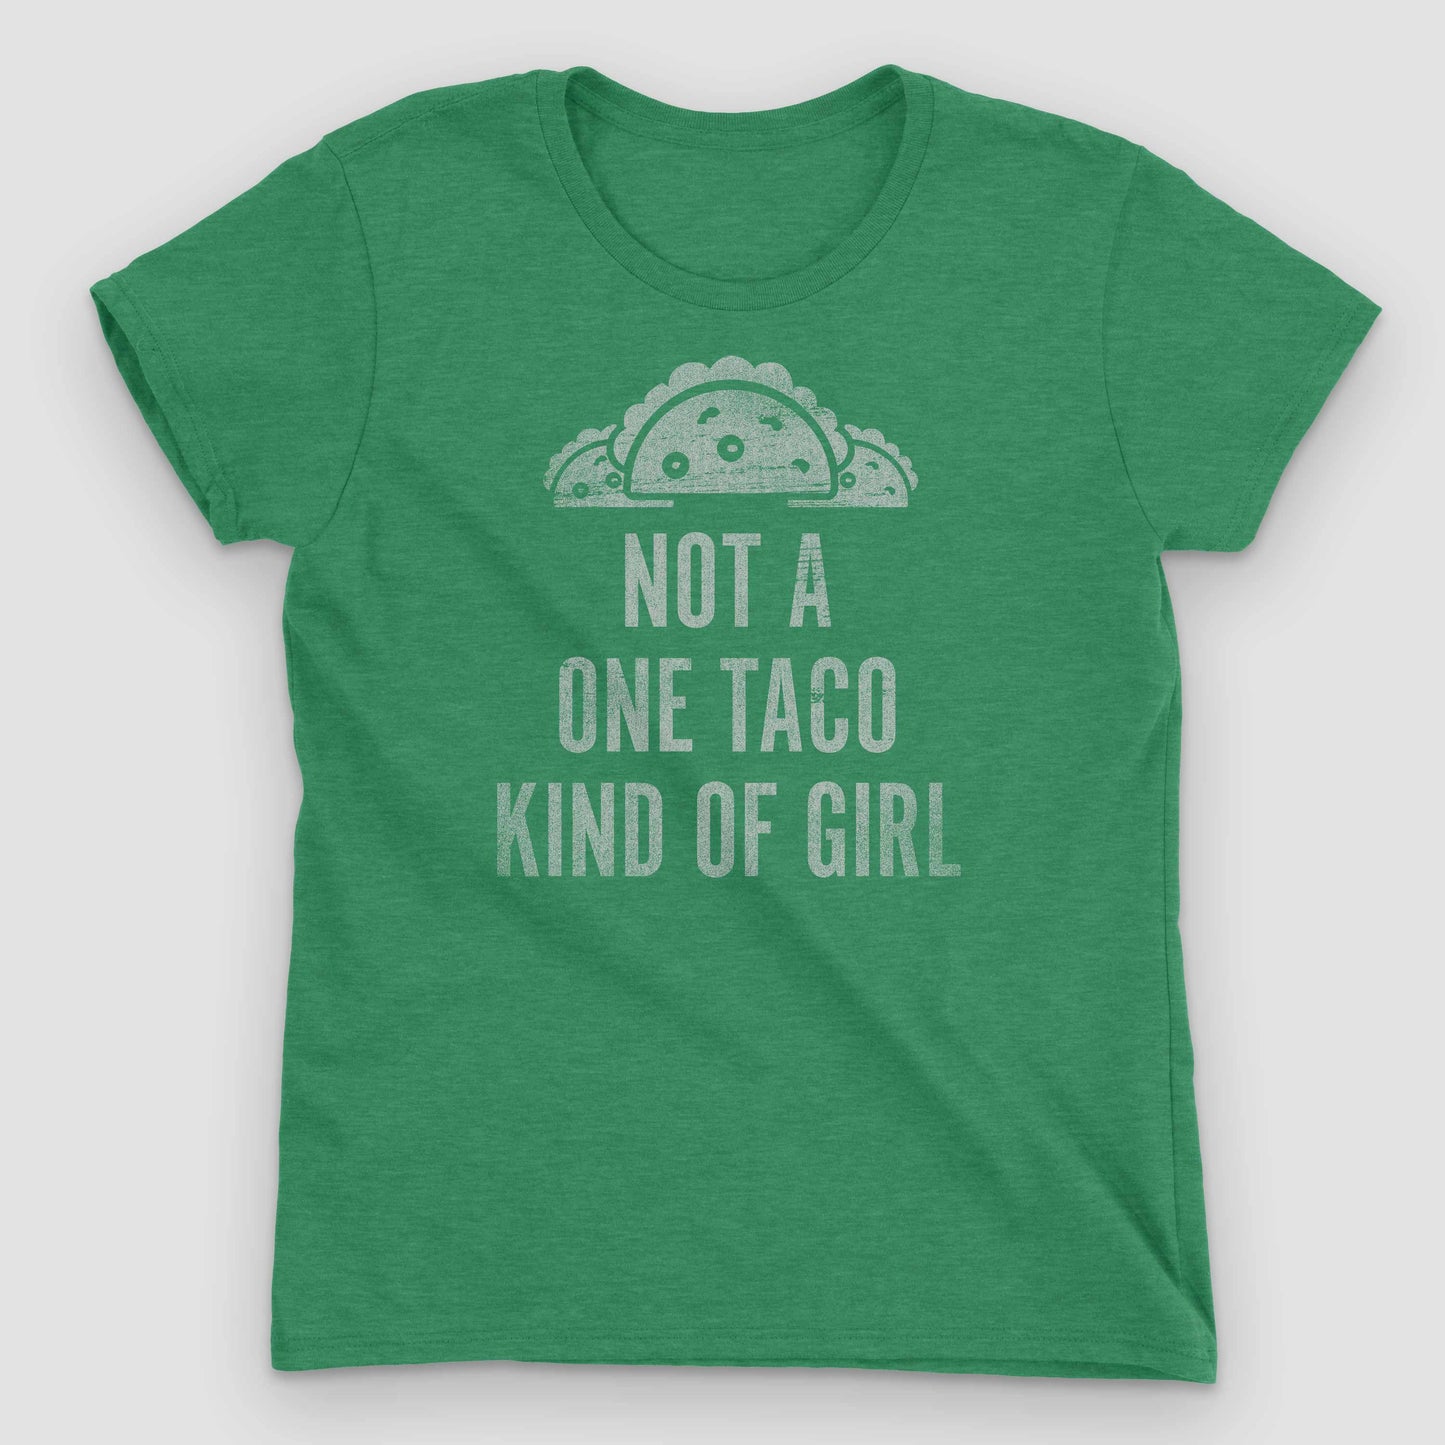 Heather Dark Grey Not a One Taco Kind of Girl Women's Graphic T-Shirt by Snaxtime